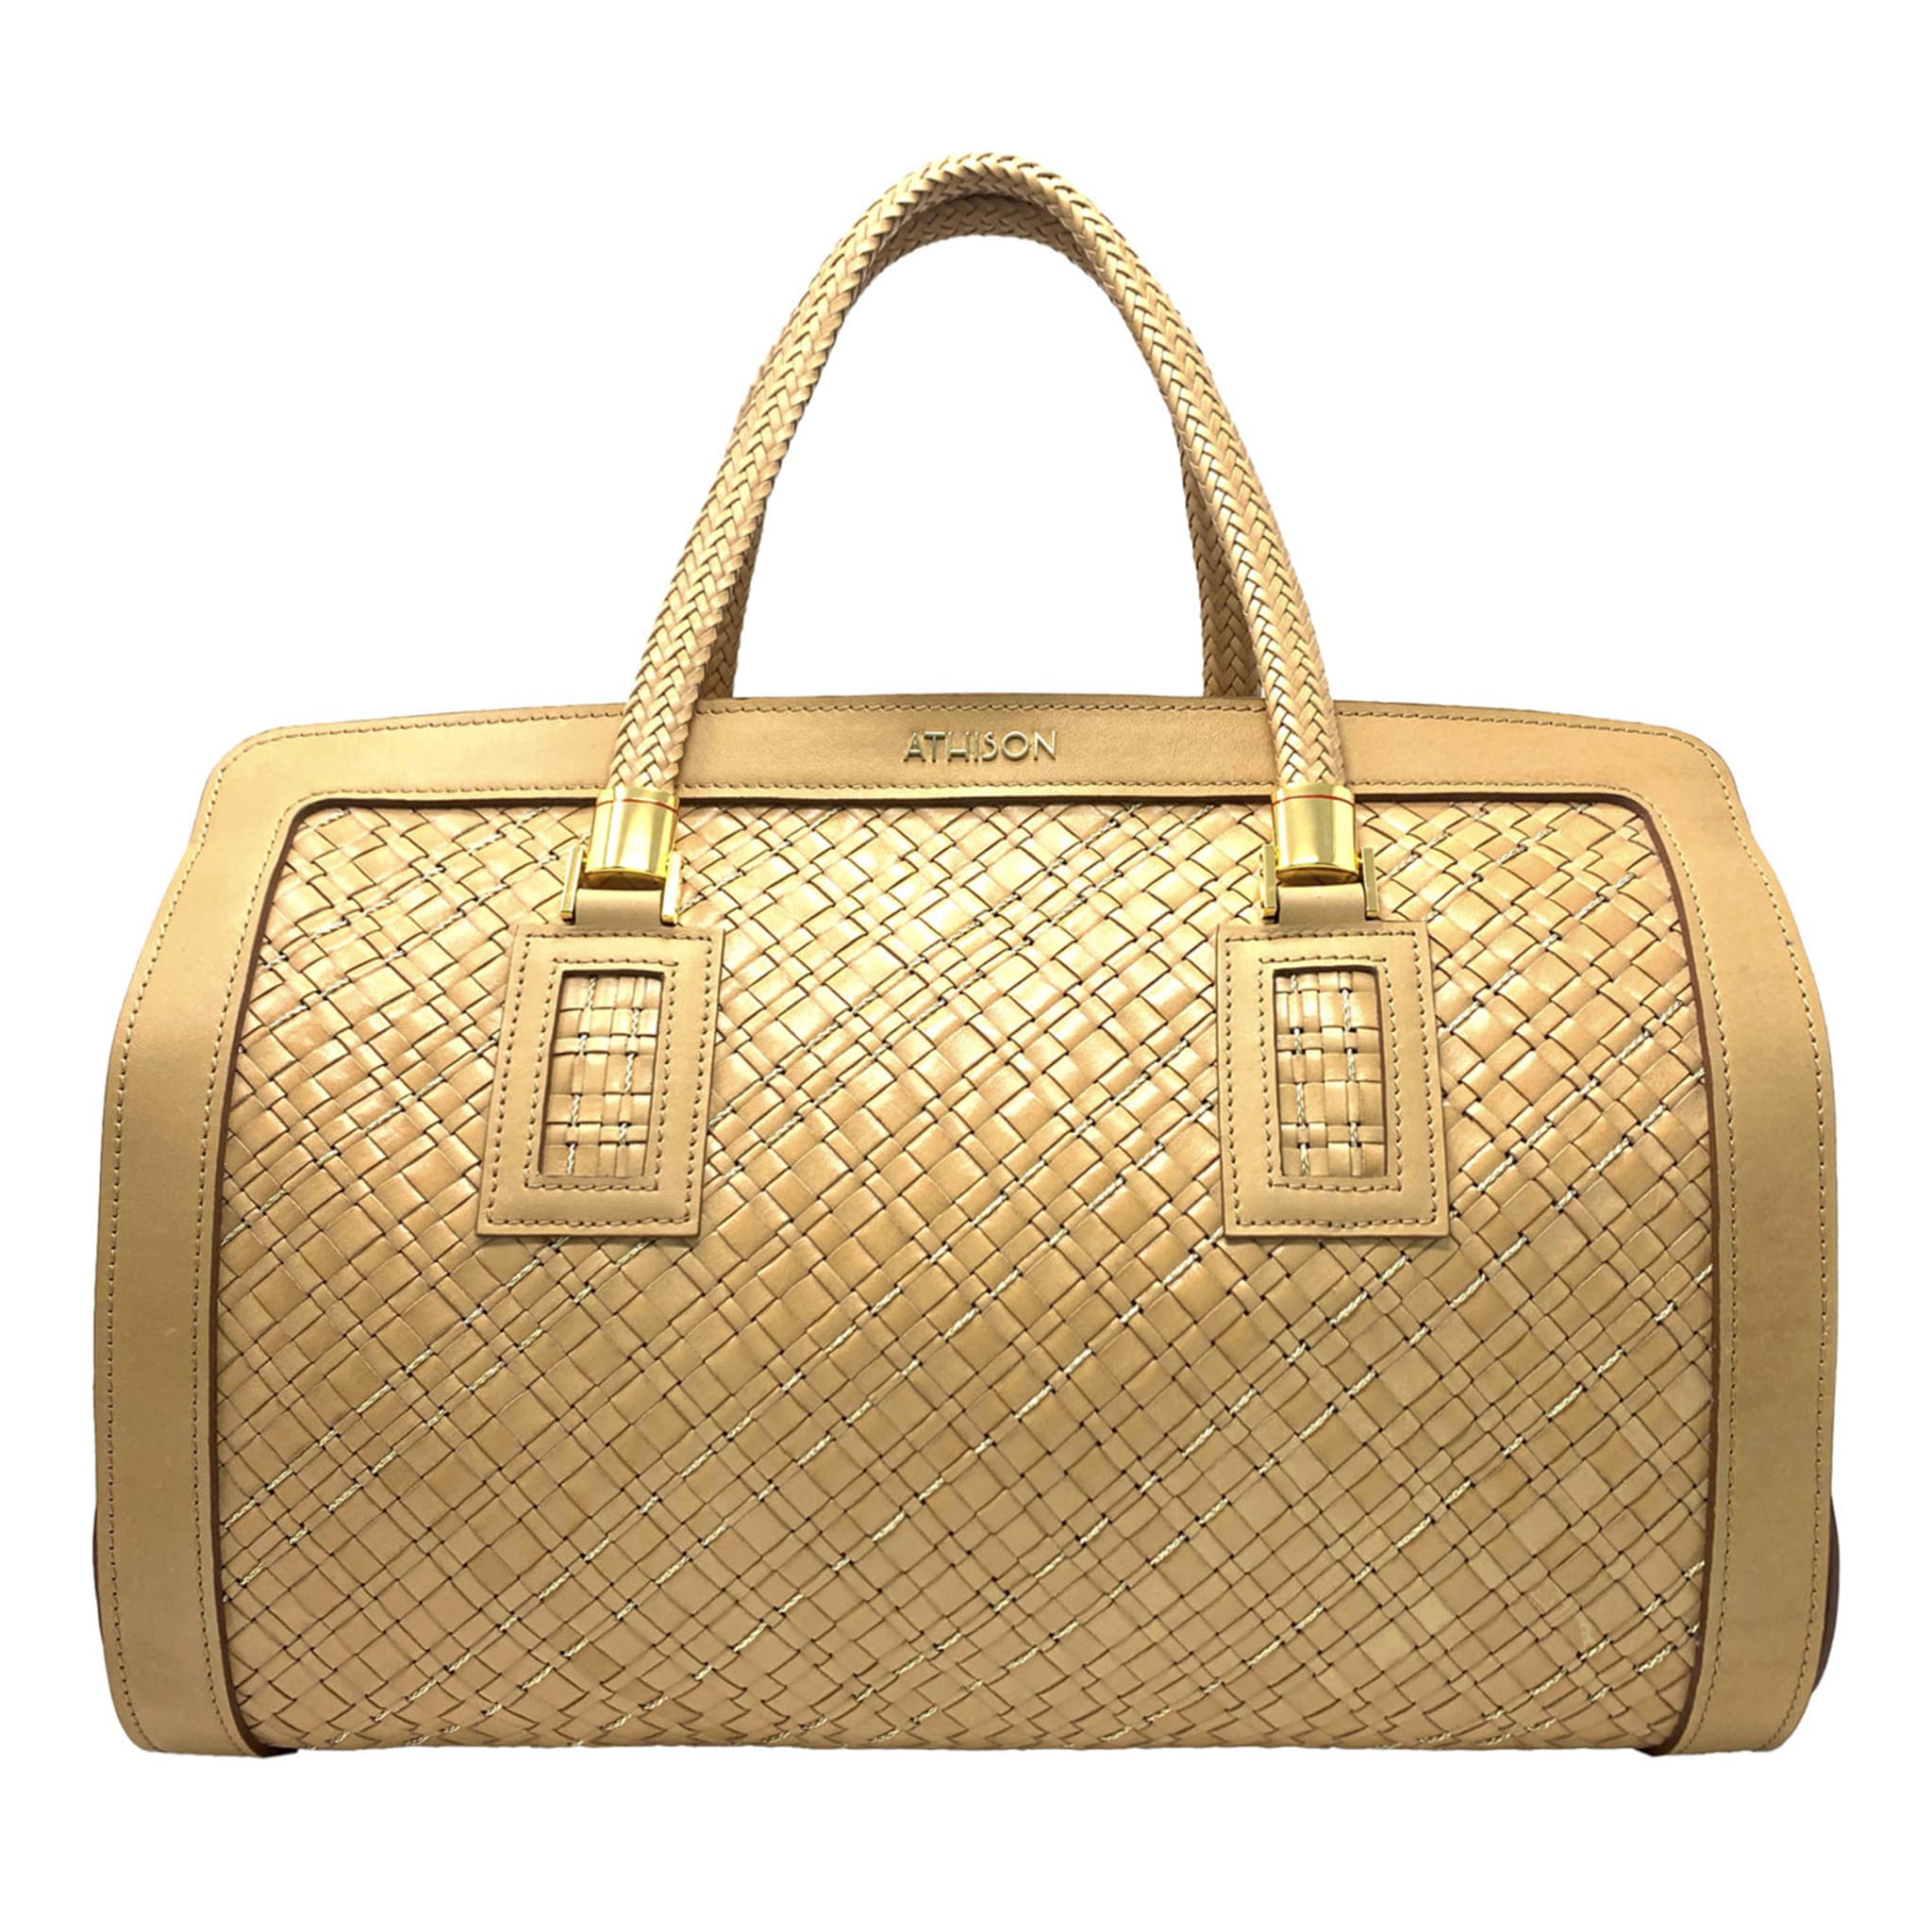 Braided Leather and Copper Handbag “Jazzi” - Beige - Main view